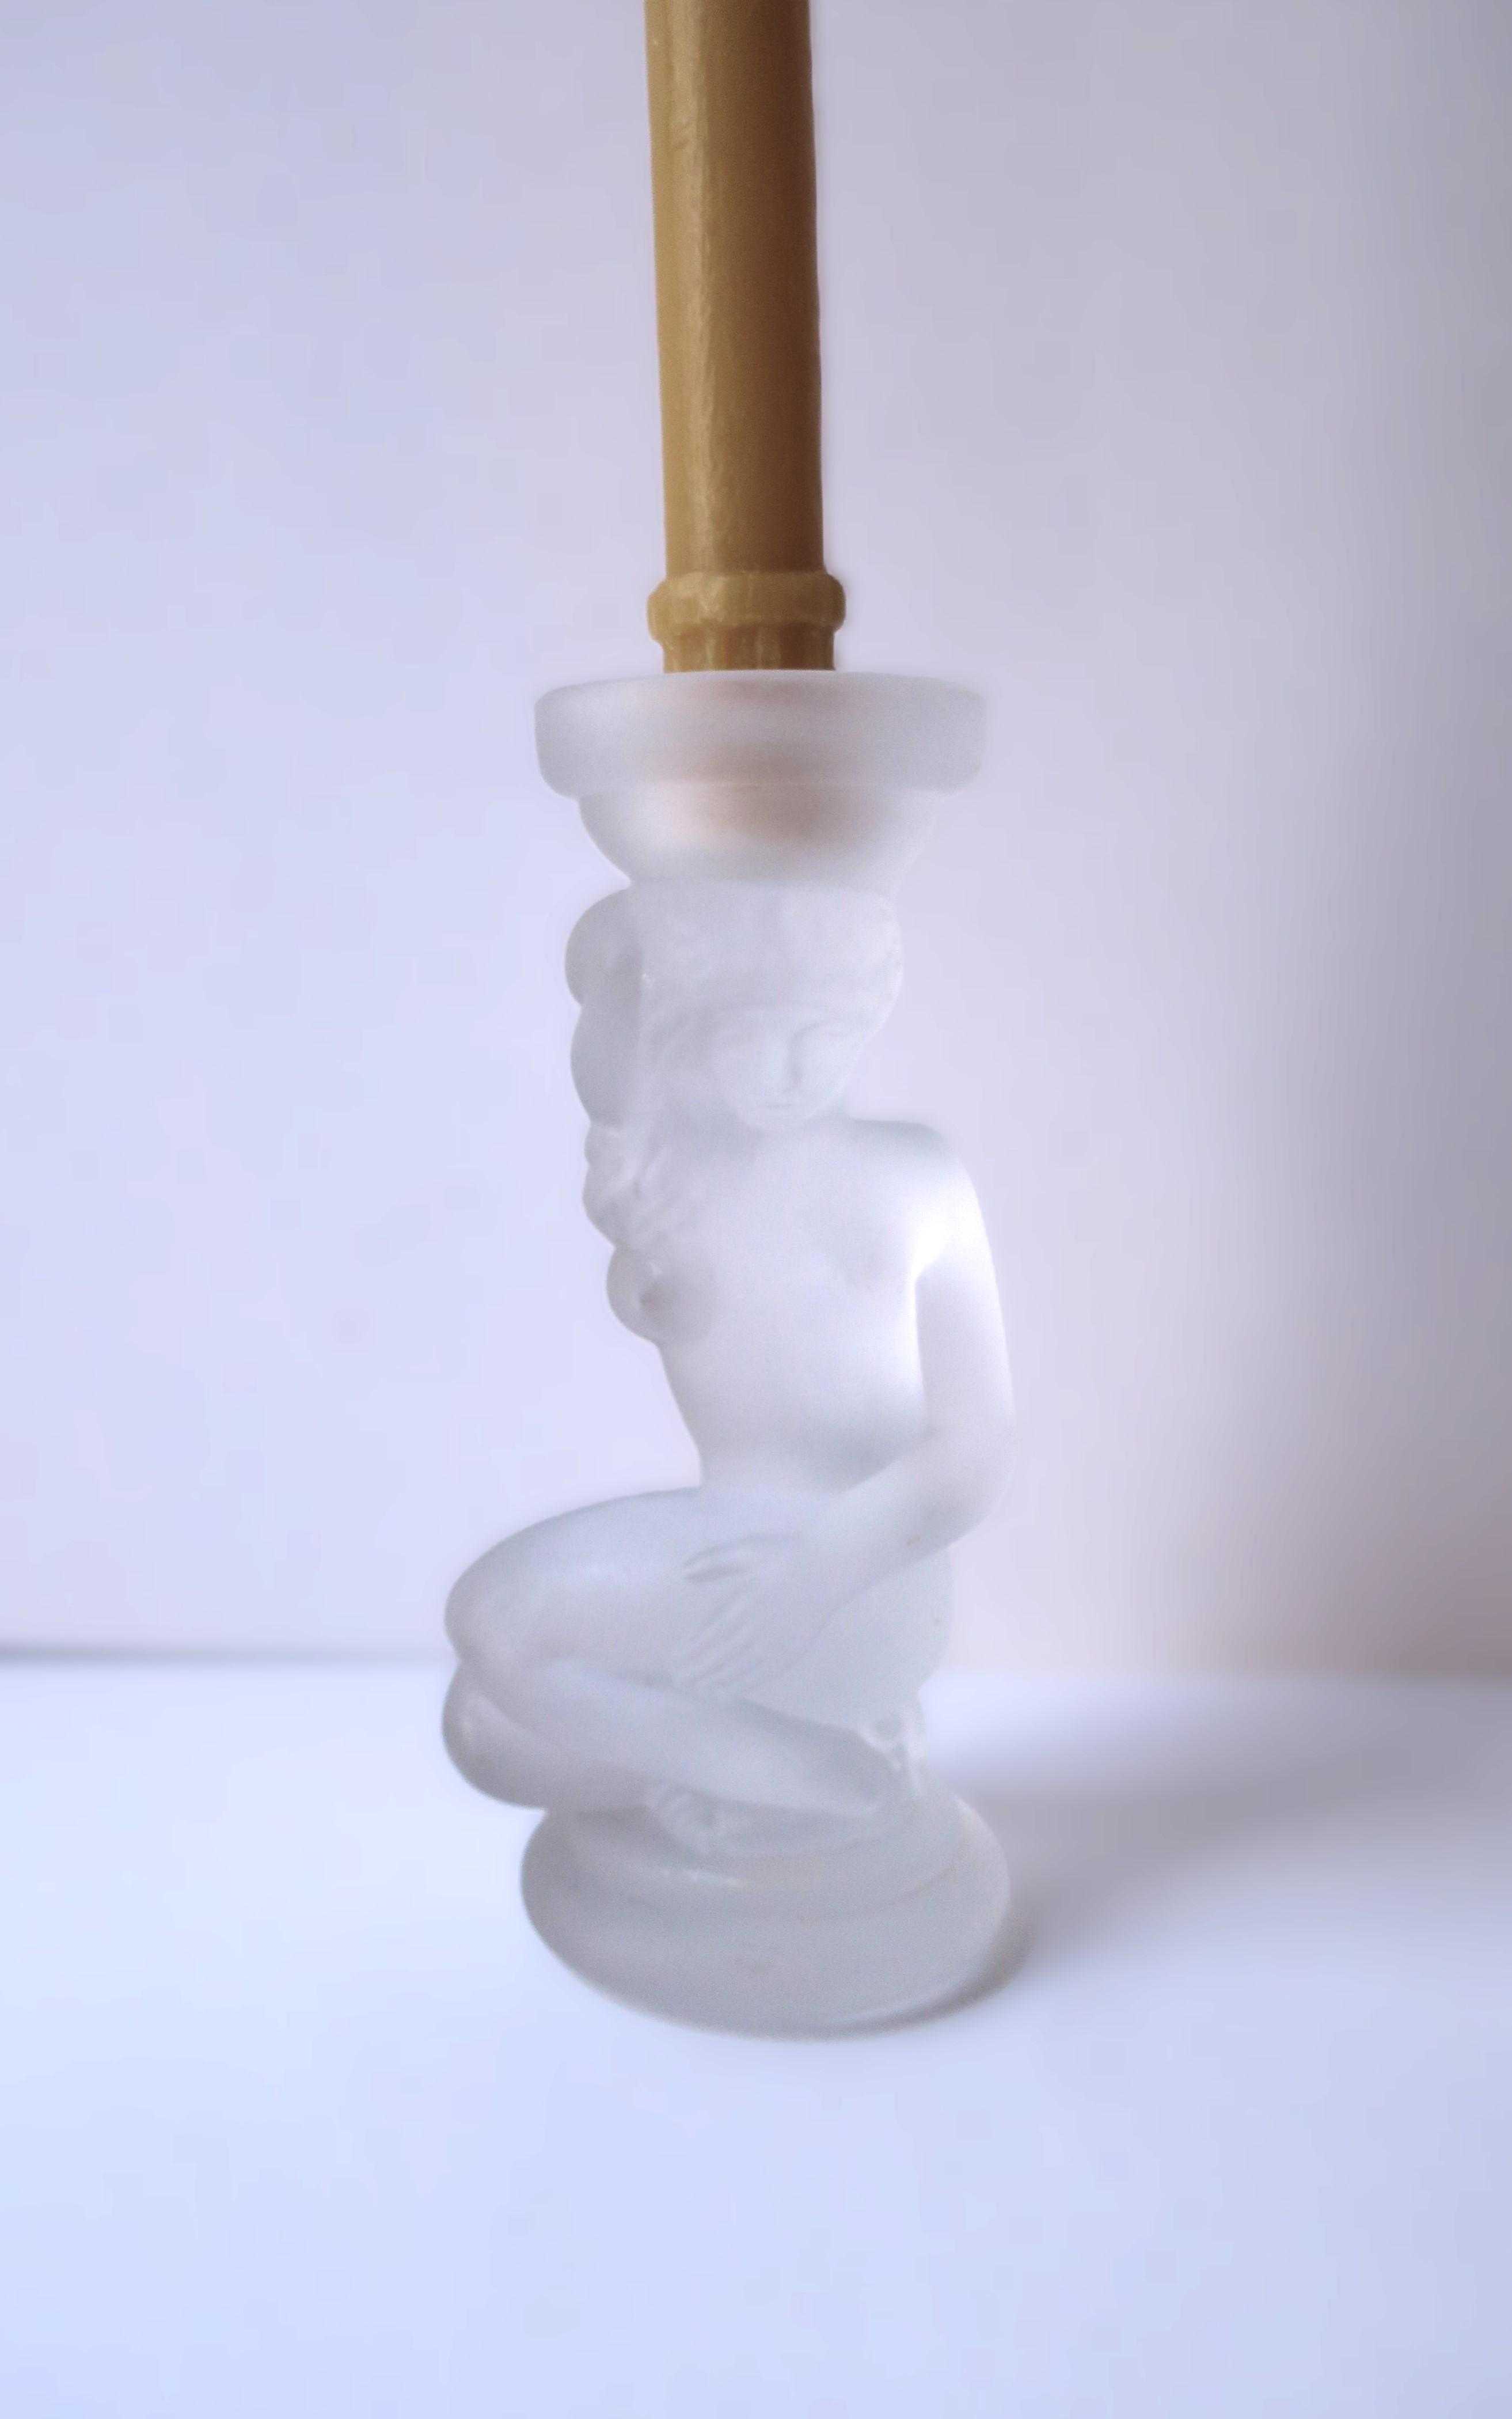 A female figurative frosted glass sculpture candlestick holder in the style of French crystal Maison, Lalique, in the Art Nouveau style, circa 20th century. A nude female figurative sculpture candlestick holder: Use with or without candle, beautiful